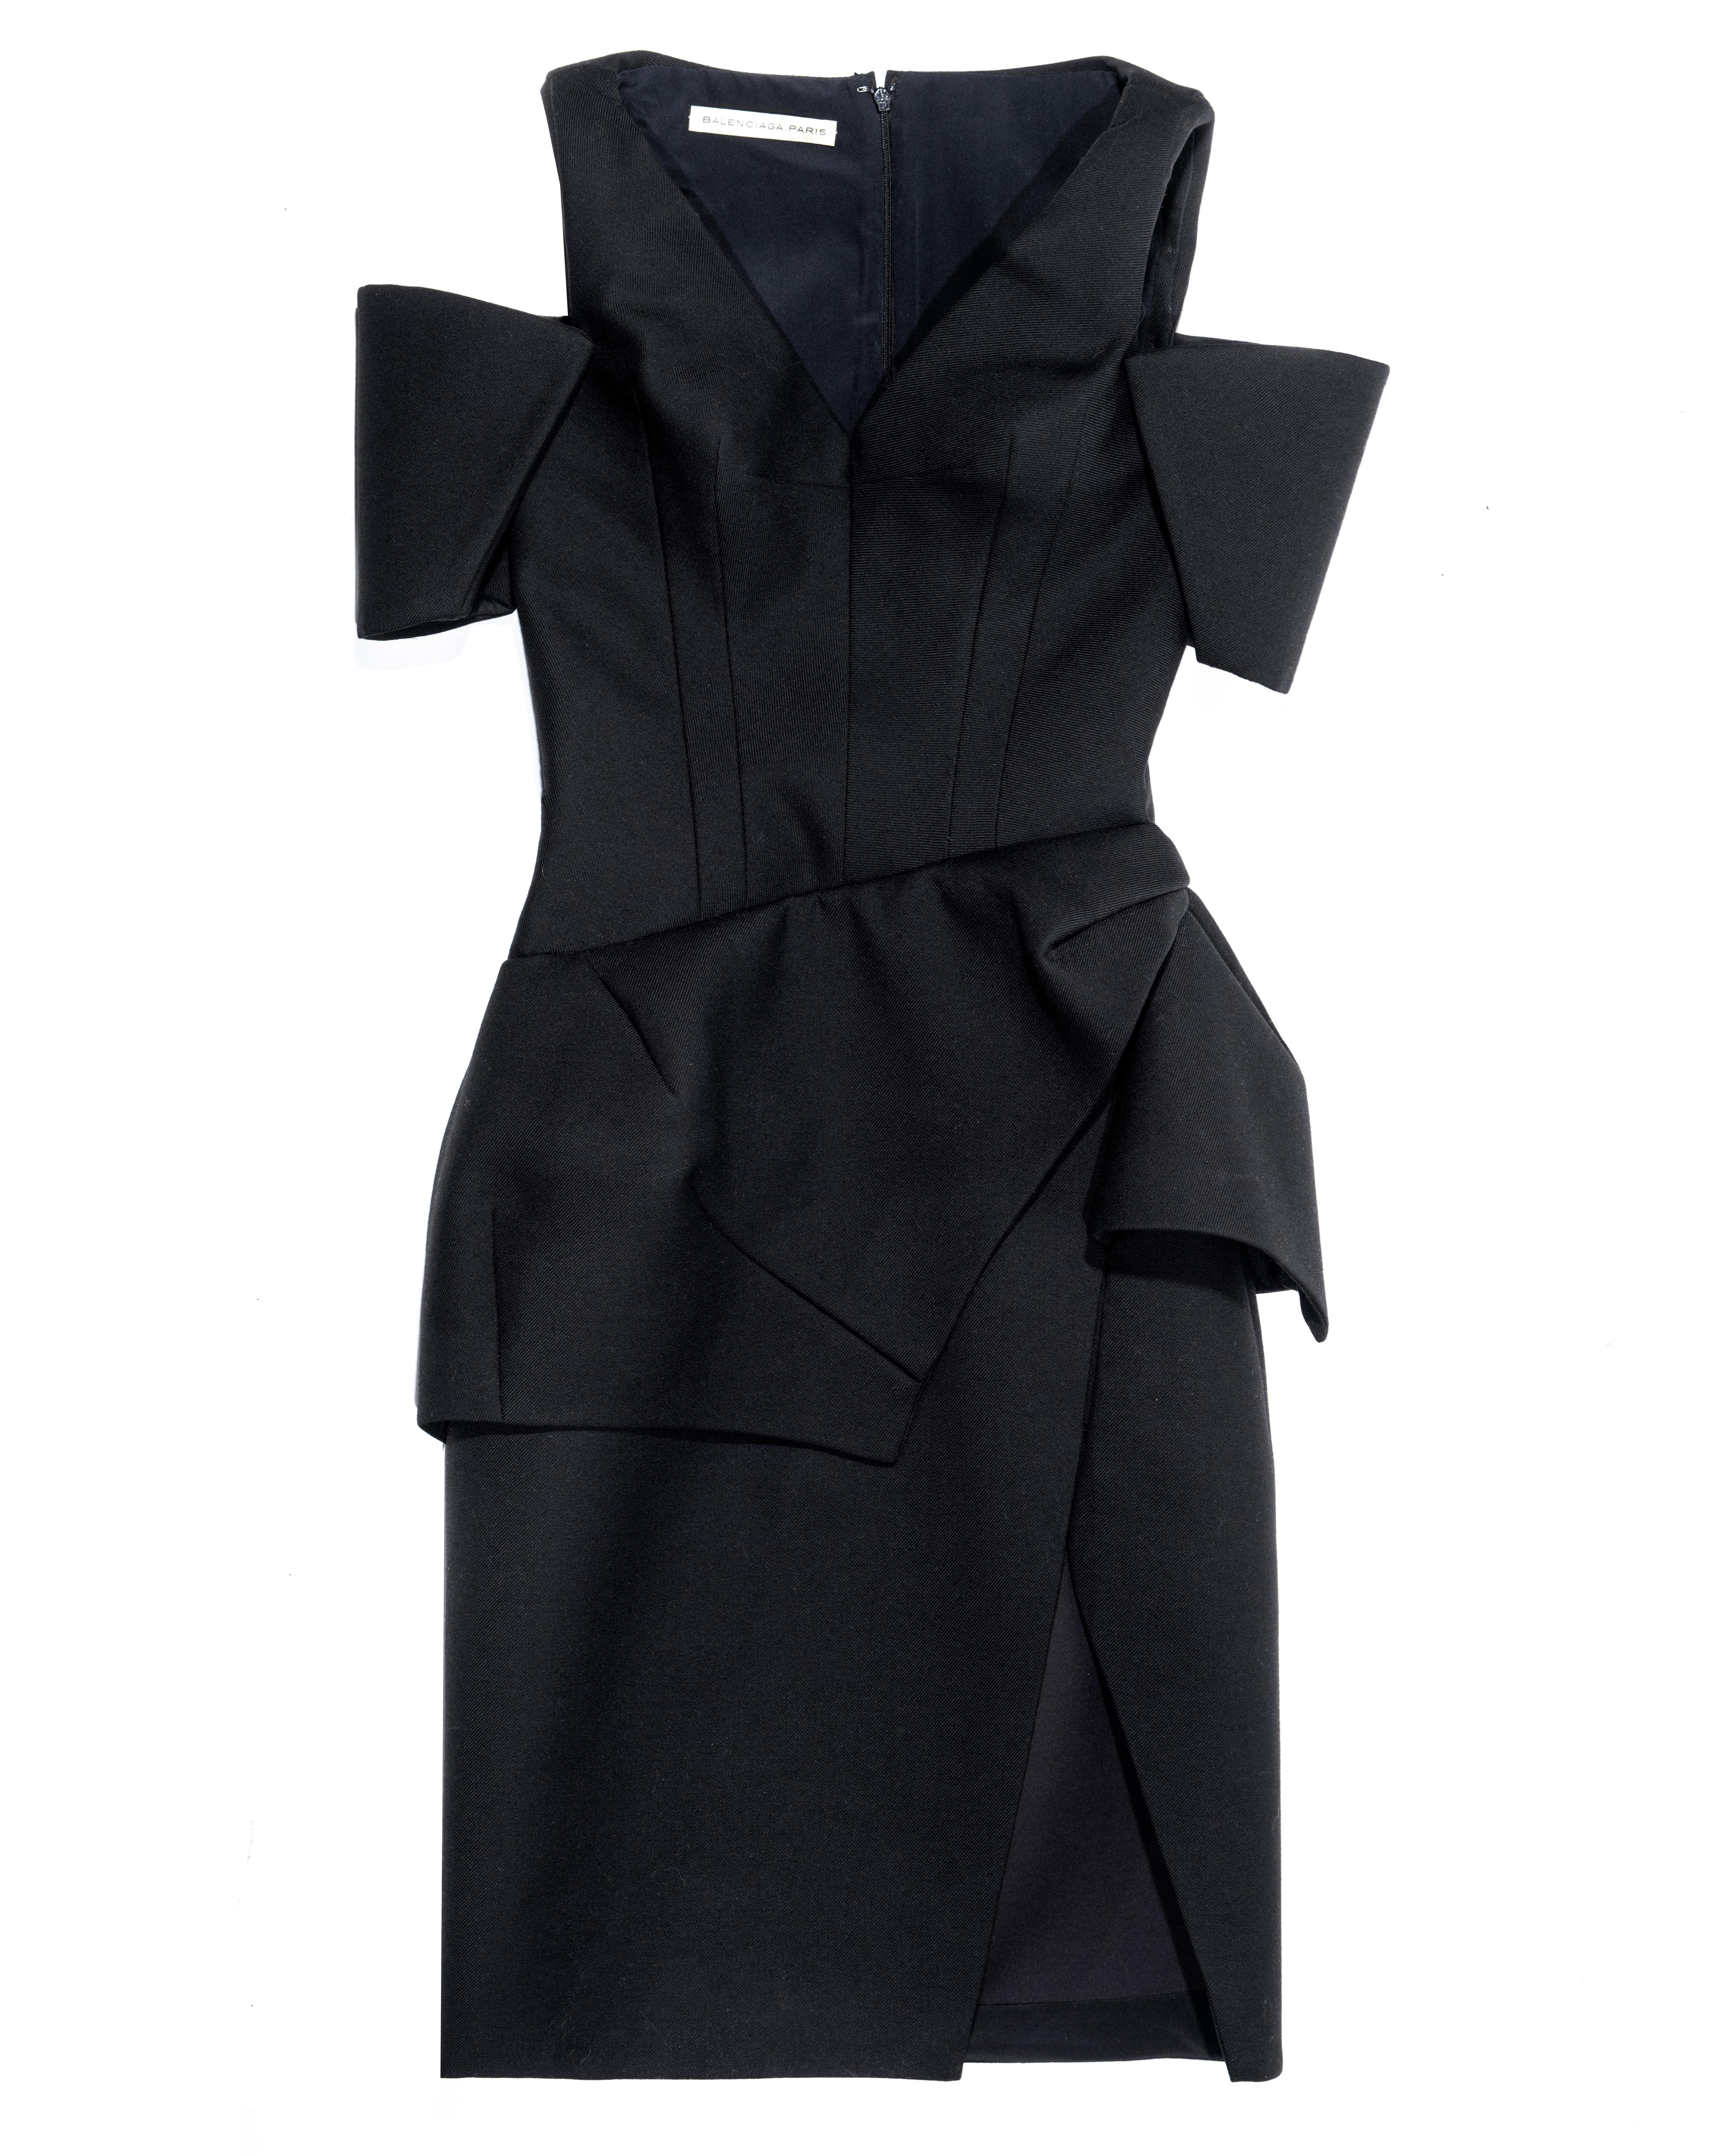 Balenciaga by Nicolas Ghesquière black wool structured cocktail dress, fw 2008 For Sale 1